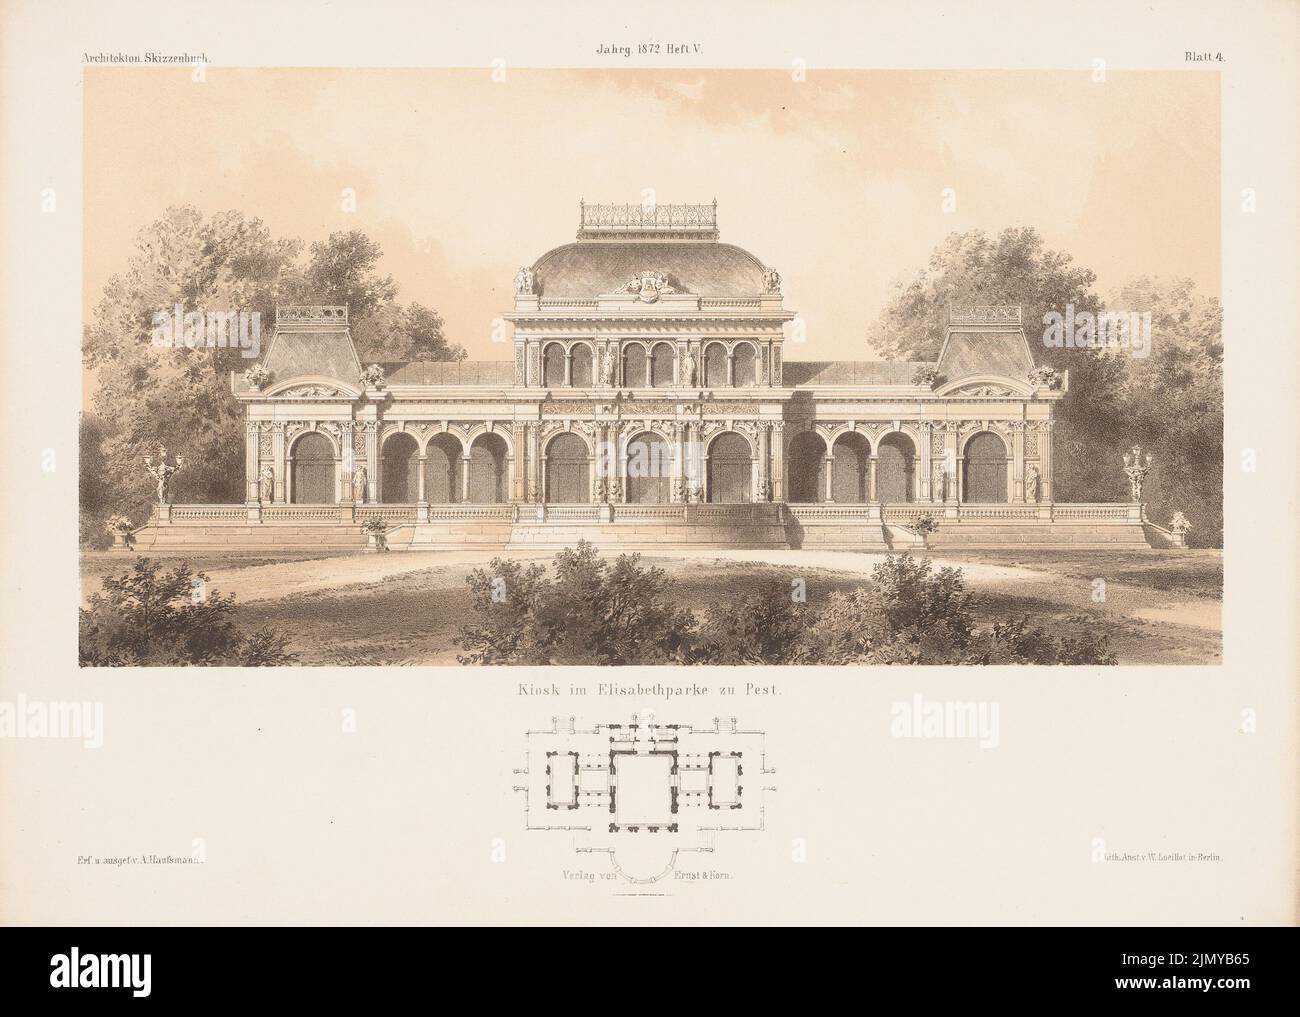 Hauszmann Alajos (1847-1926), kiosk in the Elisabethpark, pest. (From: Architectural sketchbook, H. 116/5, 1872.) (1872-1872): floor plan, view. Stitch on paper, 25 x 35 cm (including scan edges) Stock Photo